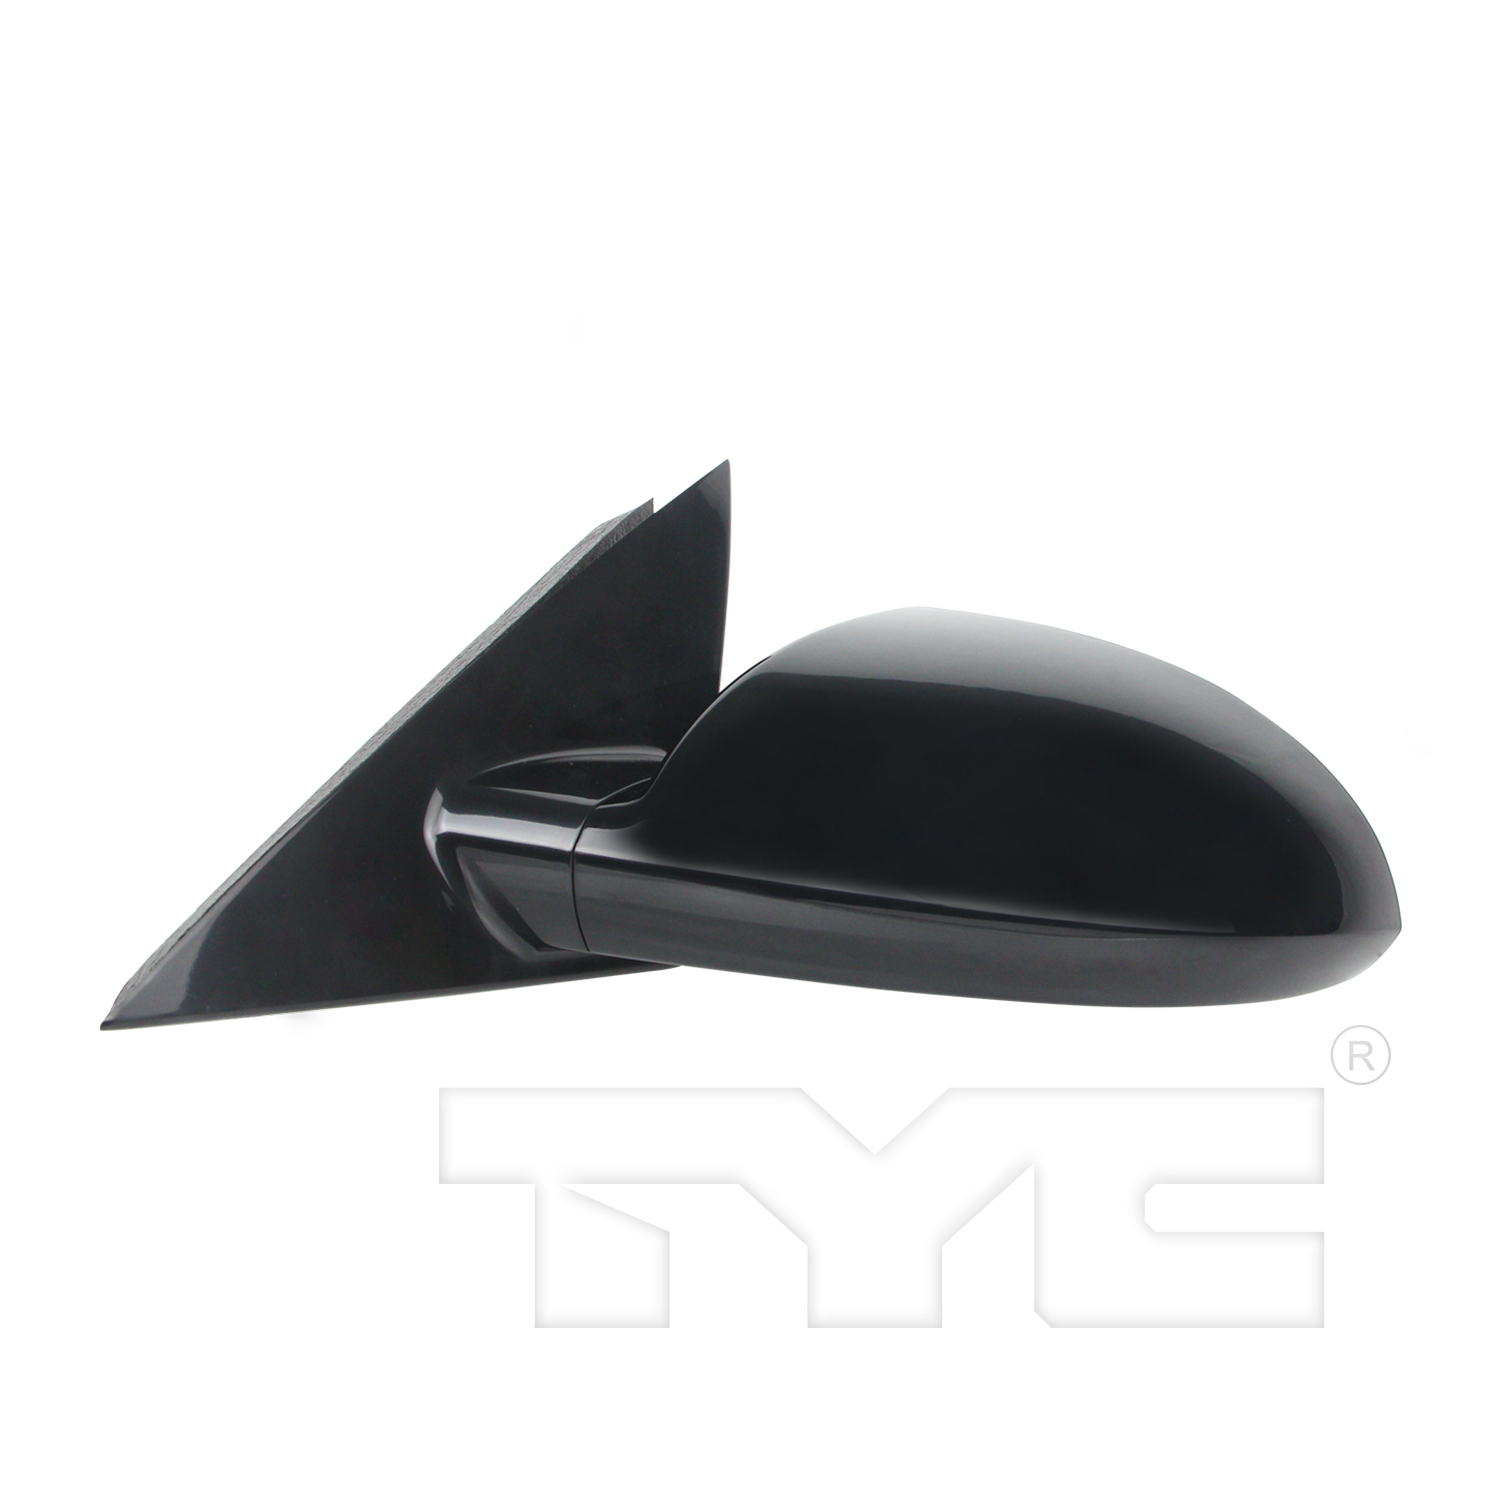 Aftermarket MIRRORS for CHEVROLET - IMPALA, IMPALA,06-13,LT Mirror outside rear view